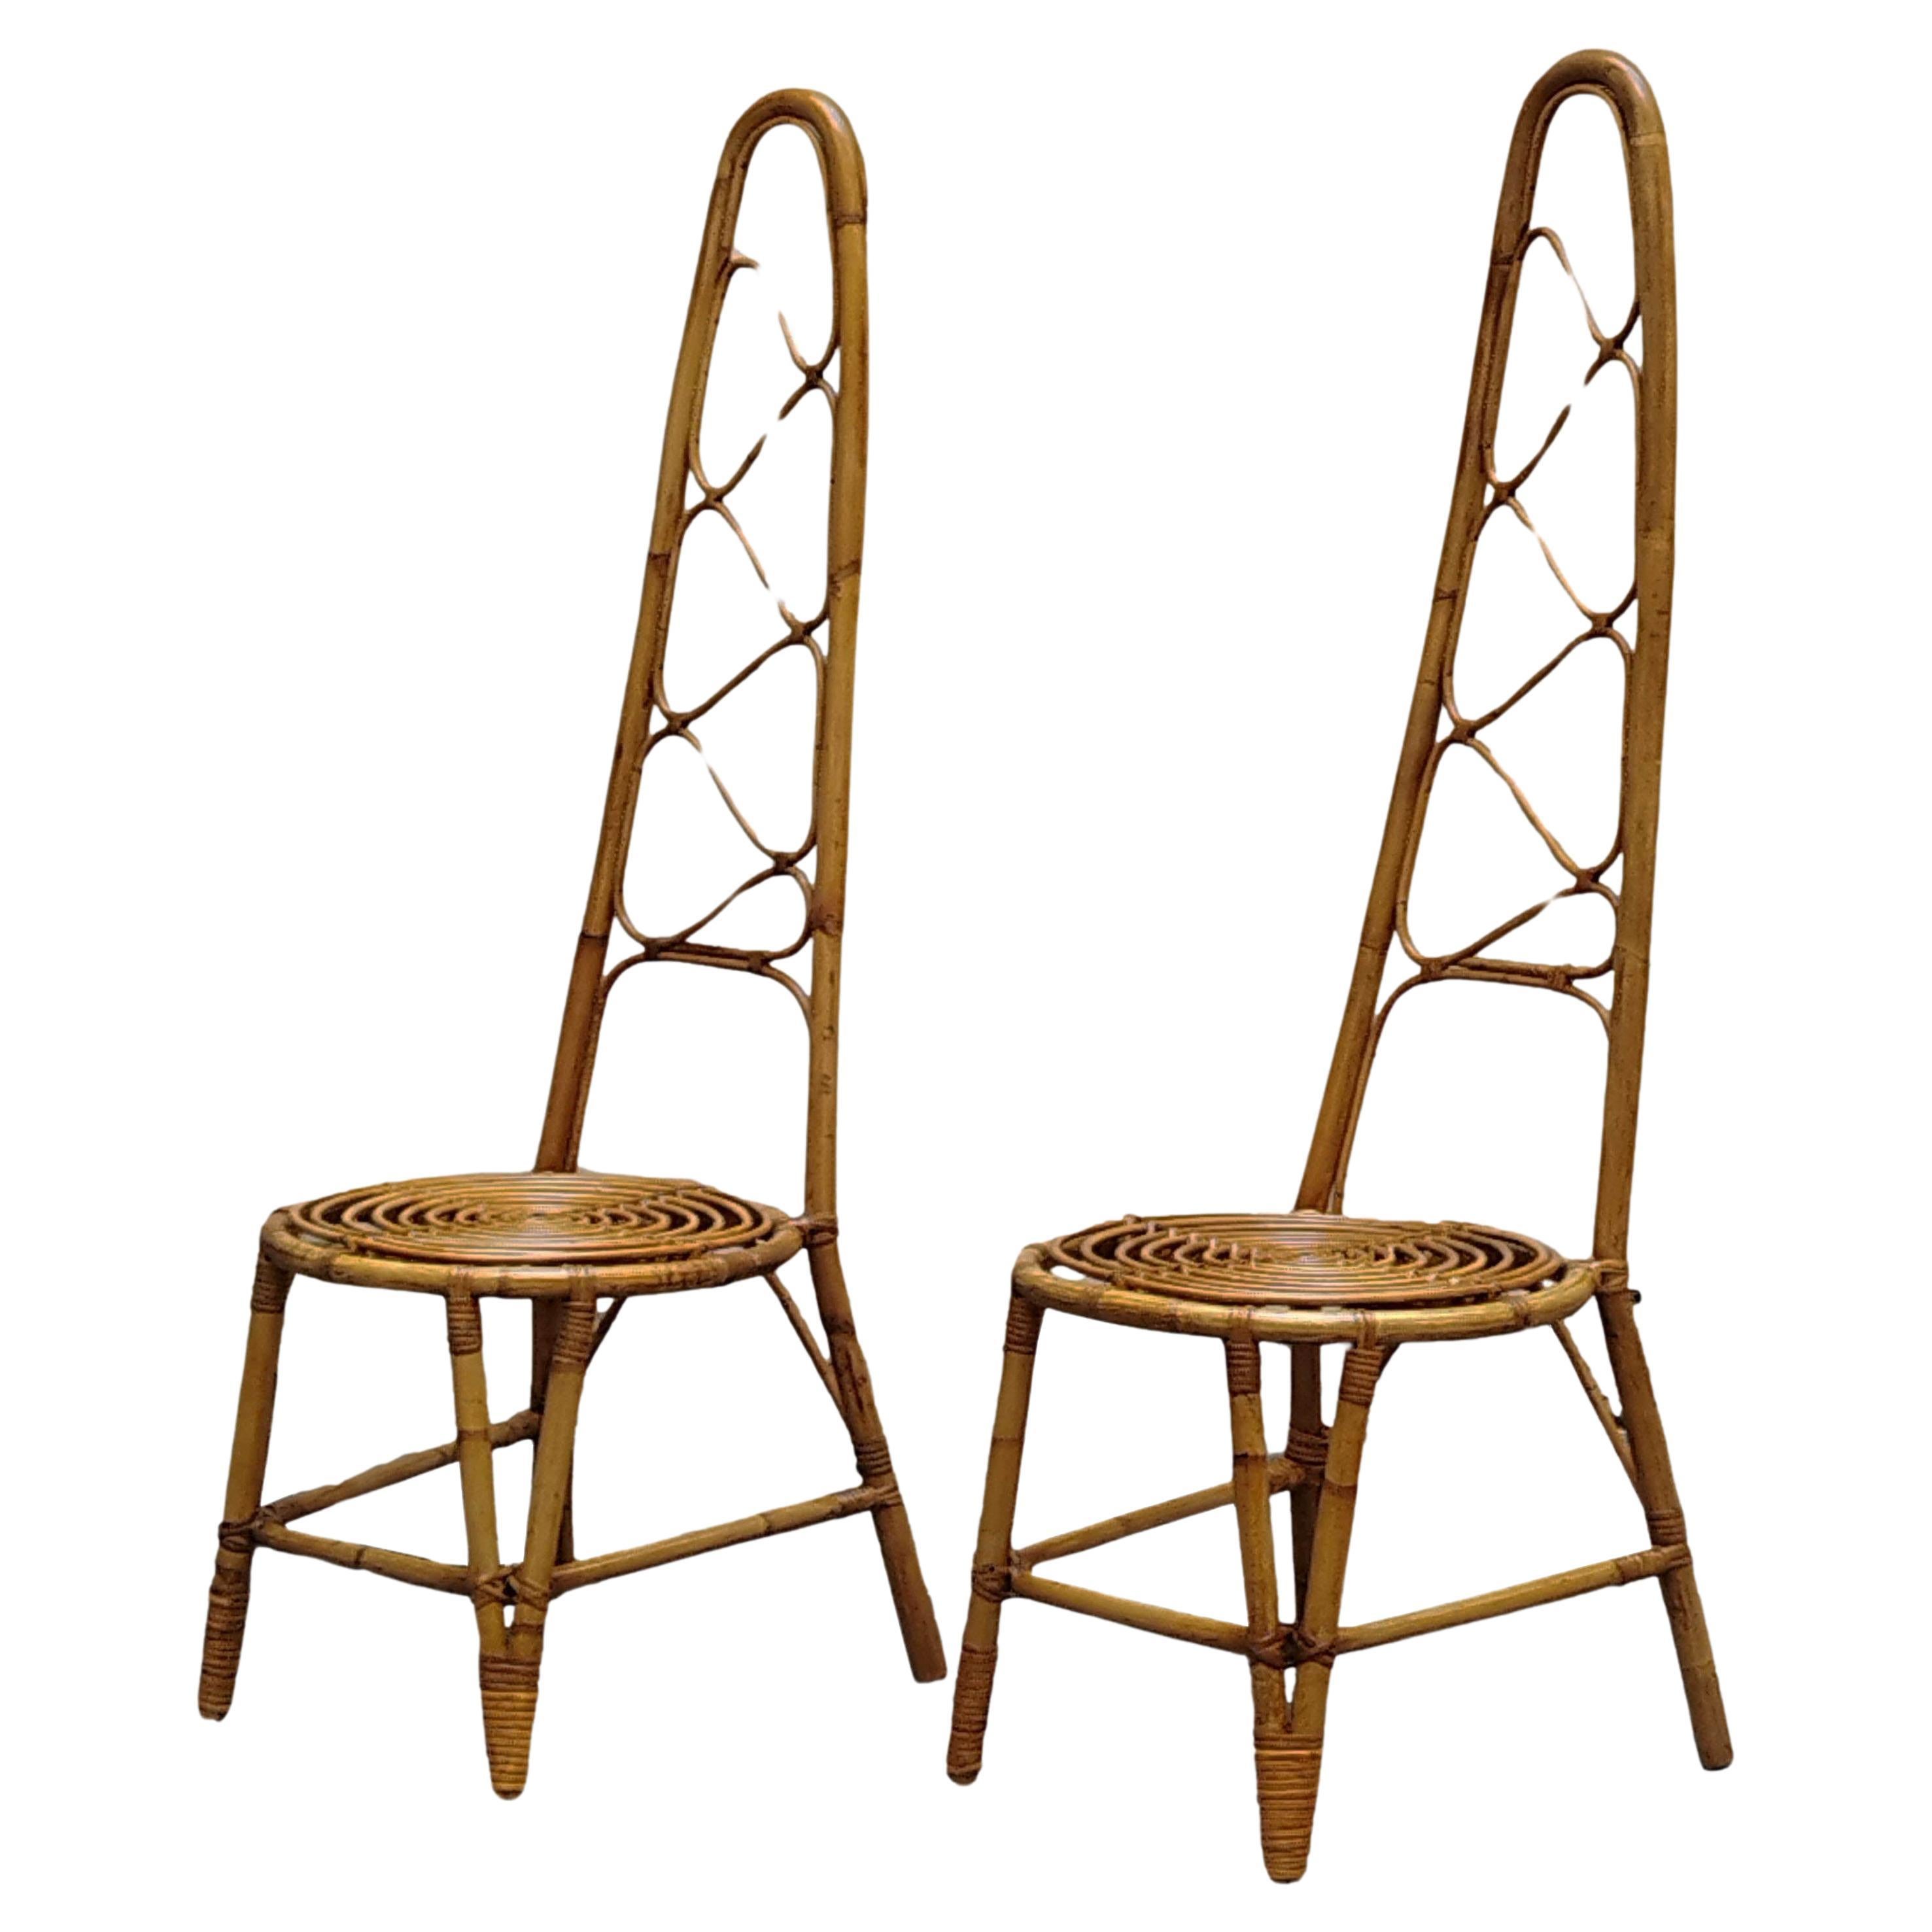 Bonacina Attrib. Pair of Rattan and Bamboo Hight-Backed Chairs, Italy, 1960s For Sale